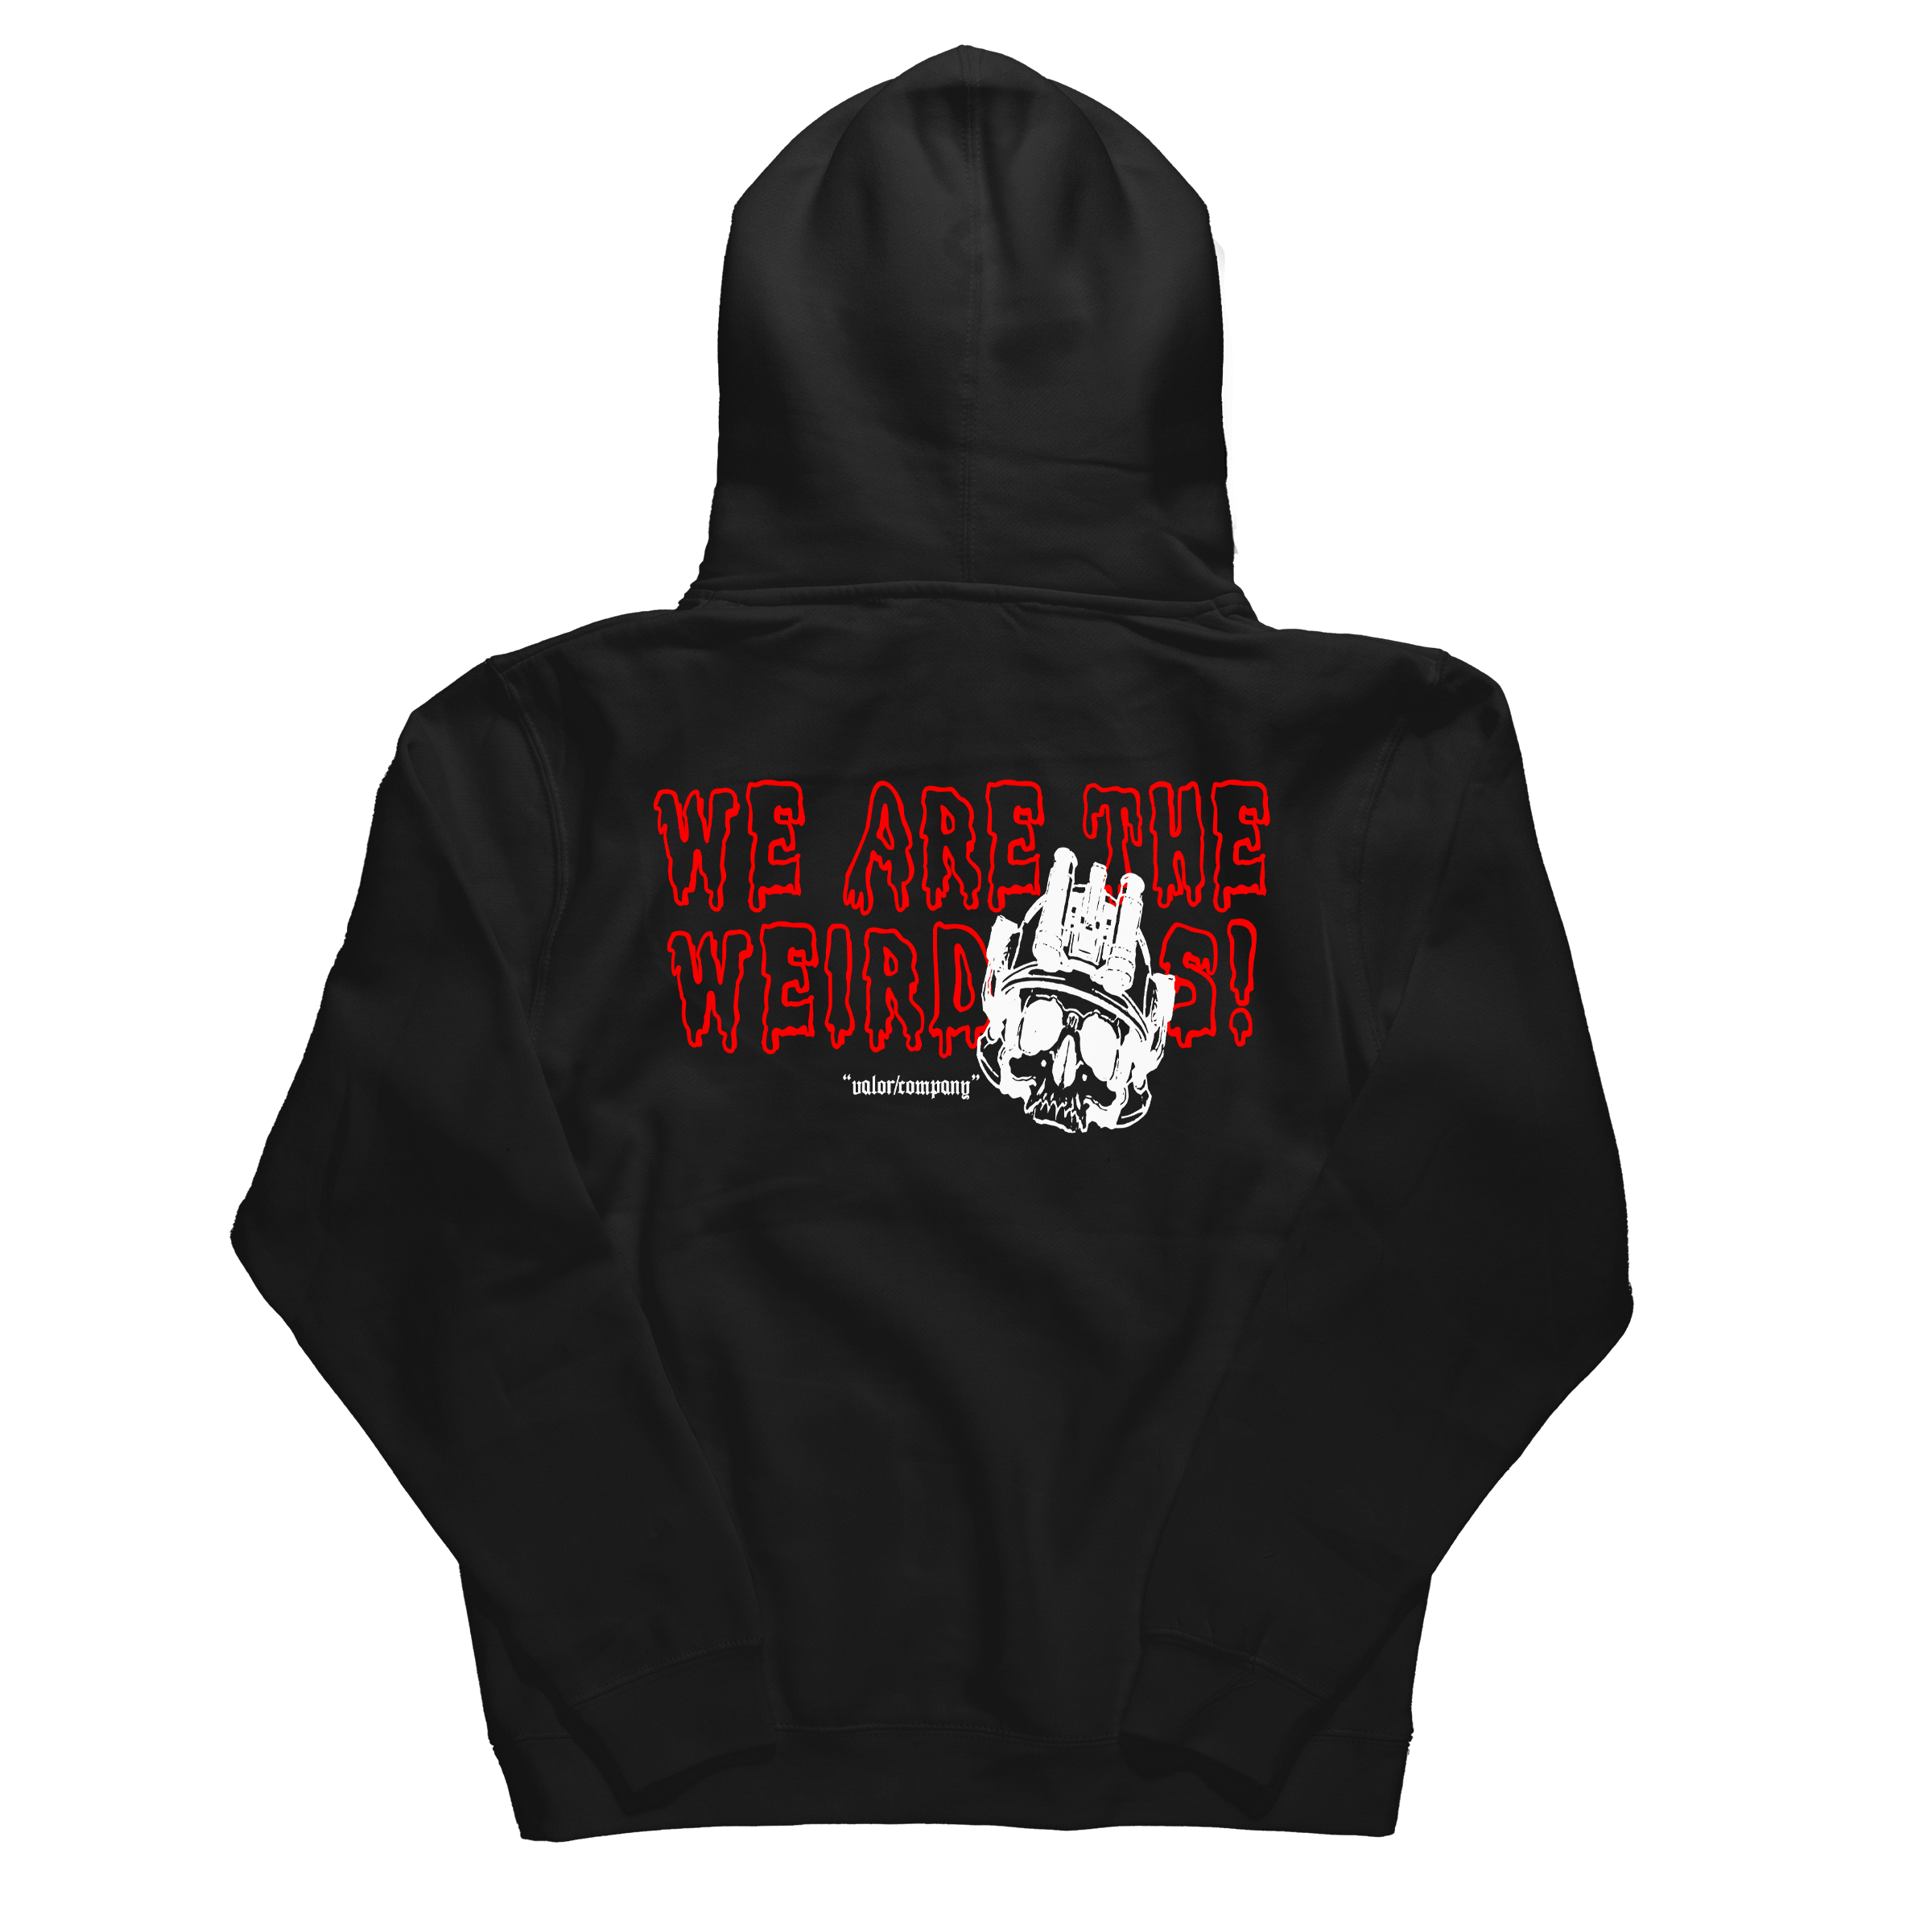 We Are The Weirdos - Hoodie